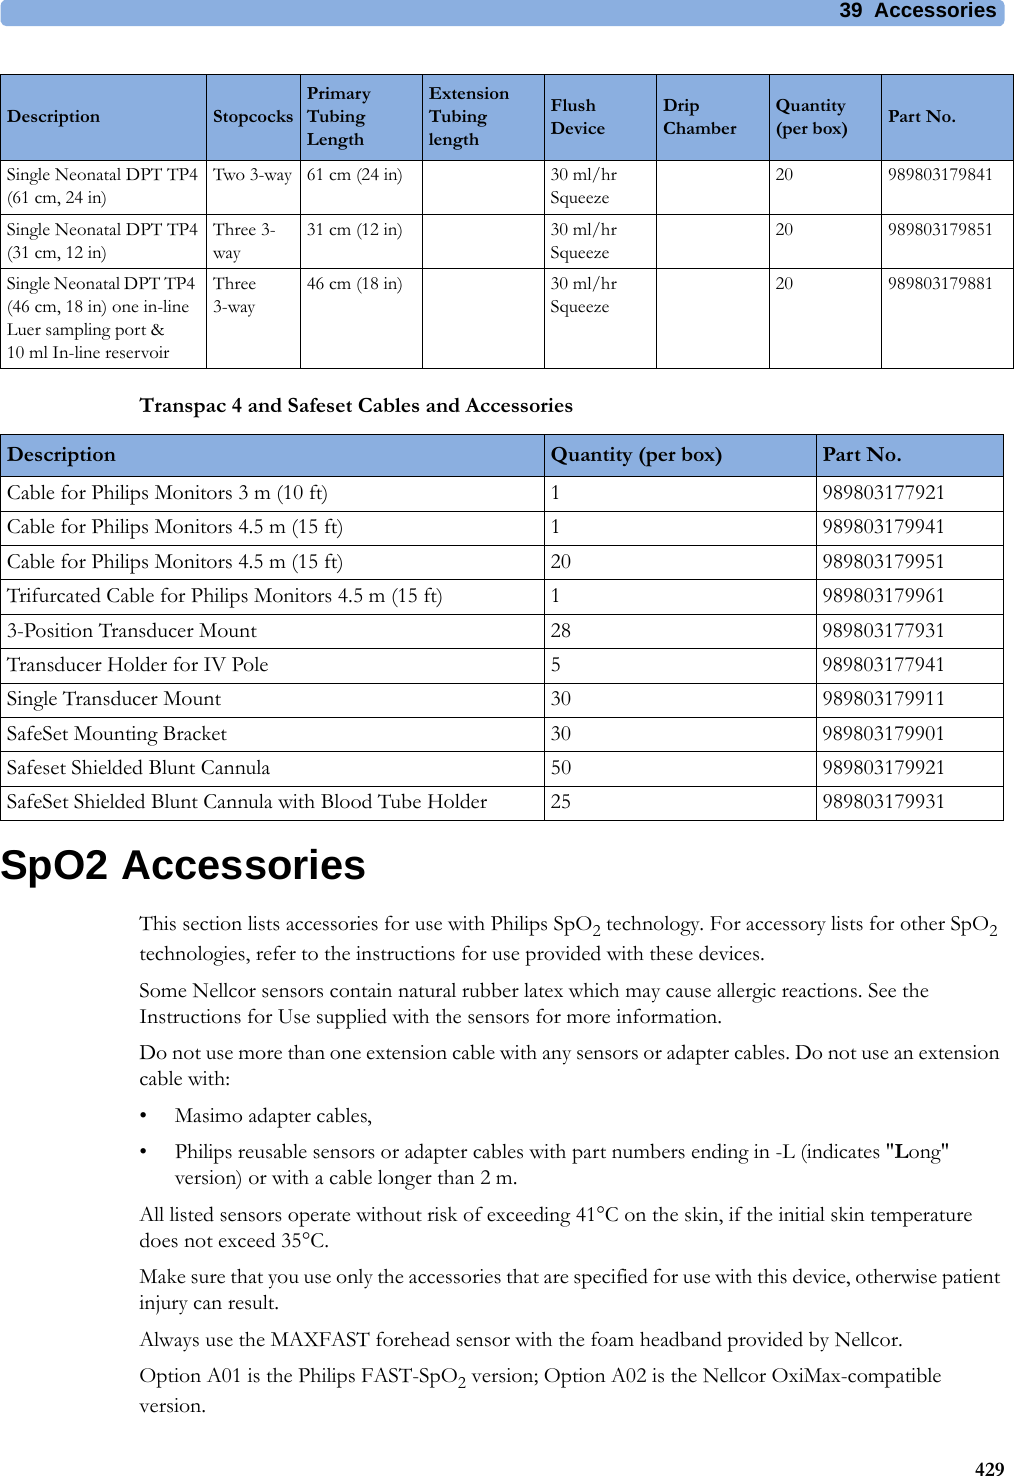 39 Accessories429Transpac 4 and Safeset Cables and AccessoriesSpO2 AccessoriesThis section lists accessories for use with Philips SpO2 technology. For accessory lists for other SpO2 technologies, refer to the instructions for use provided with these devices.Some Nellcor sensors contain natural rubber latex which may cause allergic reactions. See the Instructions for Use supplied with the sensors for more information.Do not use more than one extension cable with any sensors or adapter cables. Do not use an extension cable with:• Masimo adapter cables,• Philips reusable sensors or adapter cables with part numbers ending in -L (indicates &quot;Long&quot; version) or with a cable longer than 2 m.All listed sensors operate without risk of exceeding 41°C on the skin, if the initial skin temperature does not exceed 35°C.Make sure that you use only the accessories that are specified for use with this device, otherwise patient injury can result.Always use the MAXFAST forehead sensor with the foam headband provided by Nellcor.Option A01 is the Philips FAST-SpO2 version; Option A02 is the Nellcor OxiMax-compatible version.Single Neonatal DPT TP4 (61 cm, 24 in)Two 3-way 61 cm (24 in) 30 ml/hr Squeeze20 989803179841Single Neonatal DPT TP4 (31 cm, 12 in)Three 3-way31 cm (12 in) 30 ml/hr Squeeze20 989803179851Single Neonatal DPT TP4  (46 cm, 18 in) one in-line Luer sampling port &amp; 10 ml In-line reservoirThree 3-way46 cm (18 in) 30 ml/hr Squeeze20 989803179881Description StopcocksPrimary Tubing LengthExtension Tubing lengthFlush DeviceDrip ChamberQuantity (per box) Part No.Description Quantity (per box) Part No.Cable for Philips Monitors 3 m (10 ft) 1 989803177921Cable for Philips Monitors 4.5 m (15 ft) 1 989803179941Cable for Philips Monitors 4.5 m (15 ft)  20 989803179951Trifurcated Cable for Philips Monitors 4.5 m (15 ft) 1 9898031799613-Position Transducer Mount 28 989803177931Transducer Holder for IV Pole 5 989803177941Single Transducer Mount 30 989803179911SafeSet Mounting Bracket 30 989803179901Safeset Shielded Blunt Cannula 50 989803179921SafeSet Shielded Blunt Cannula with Blood Tube Holder 25 989803179931